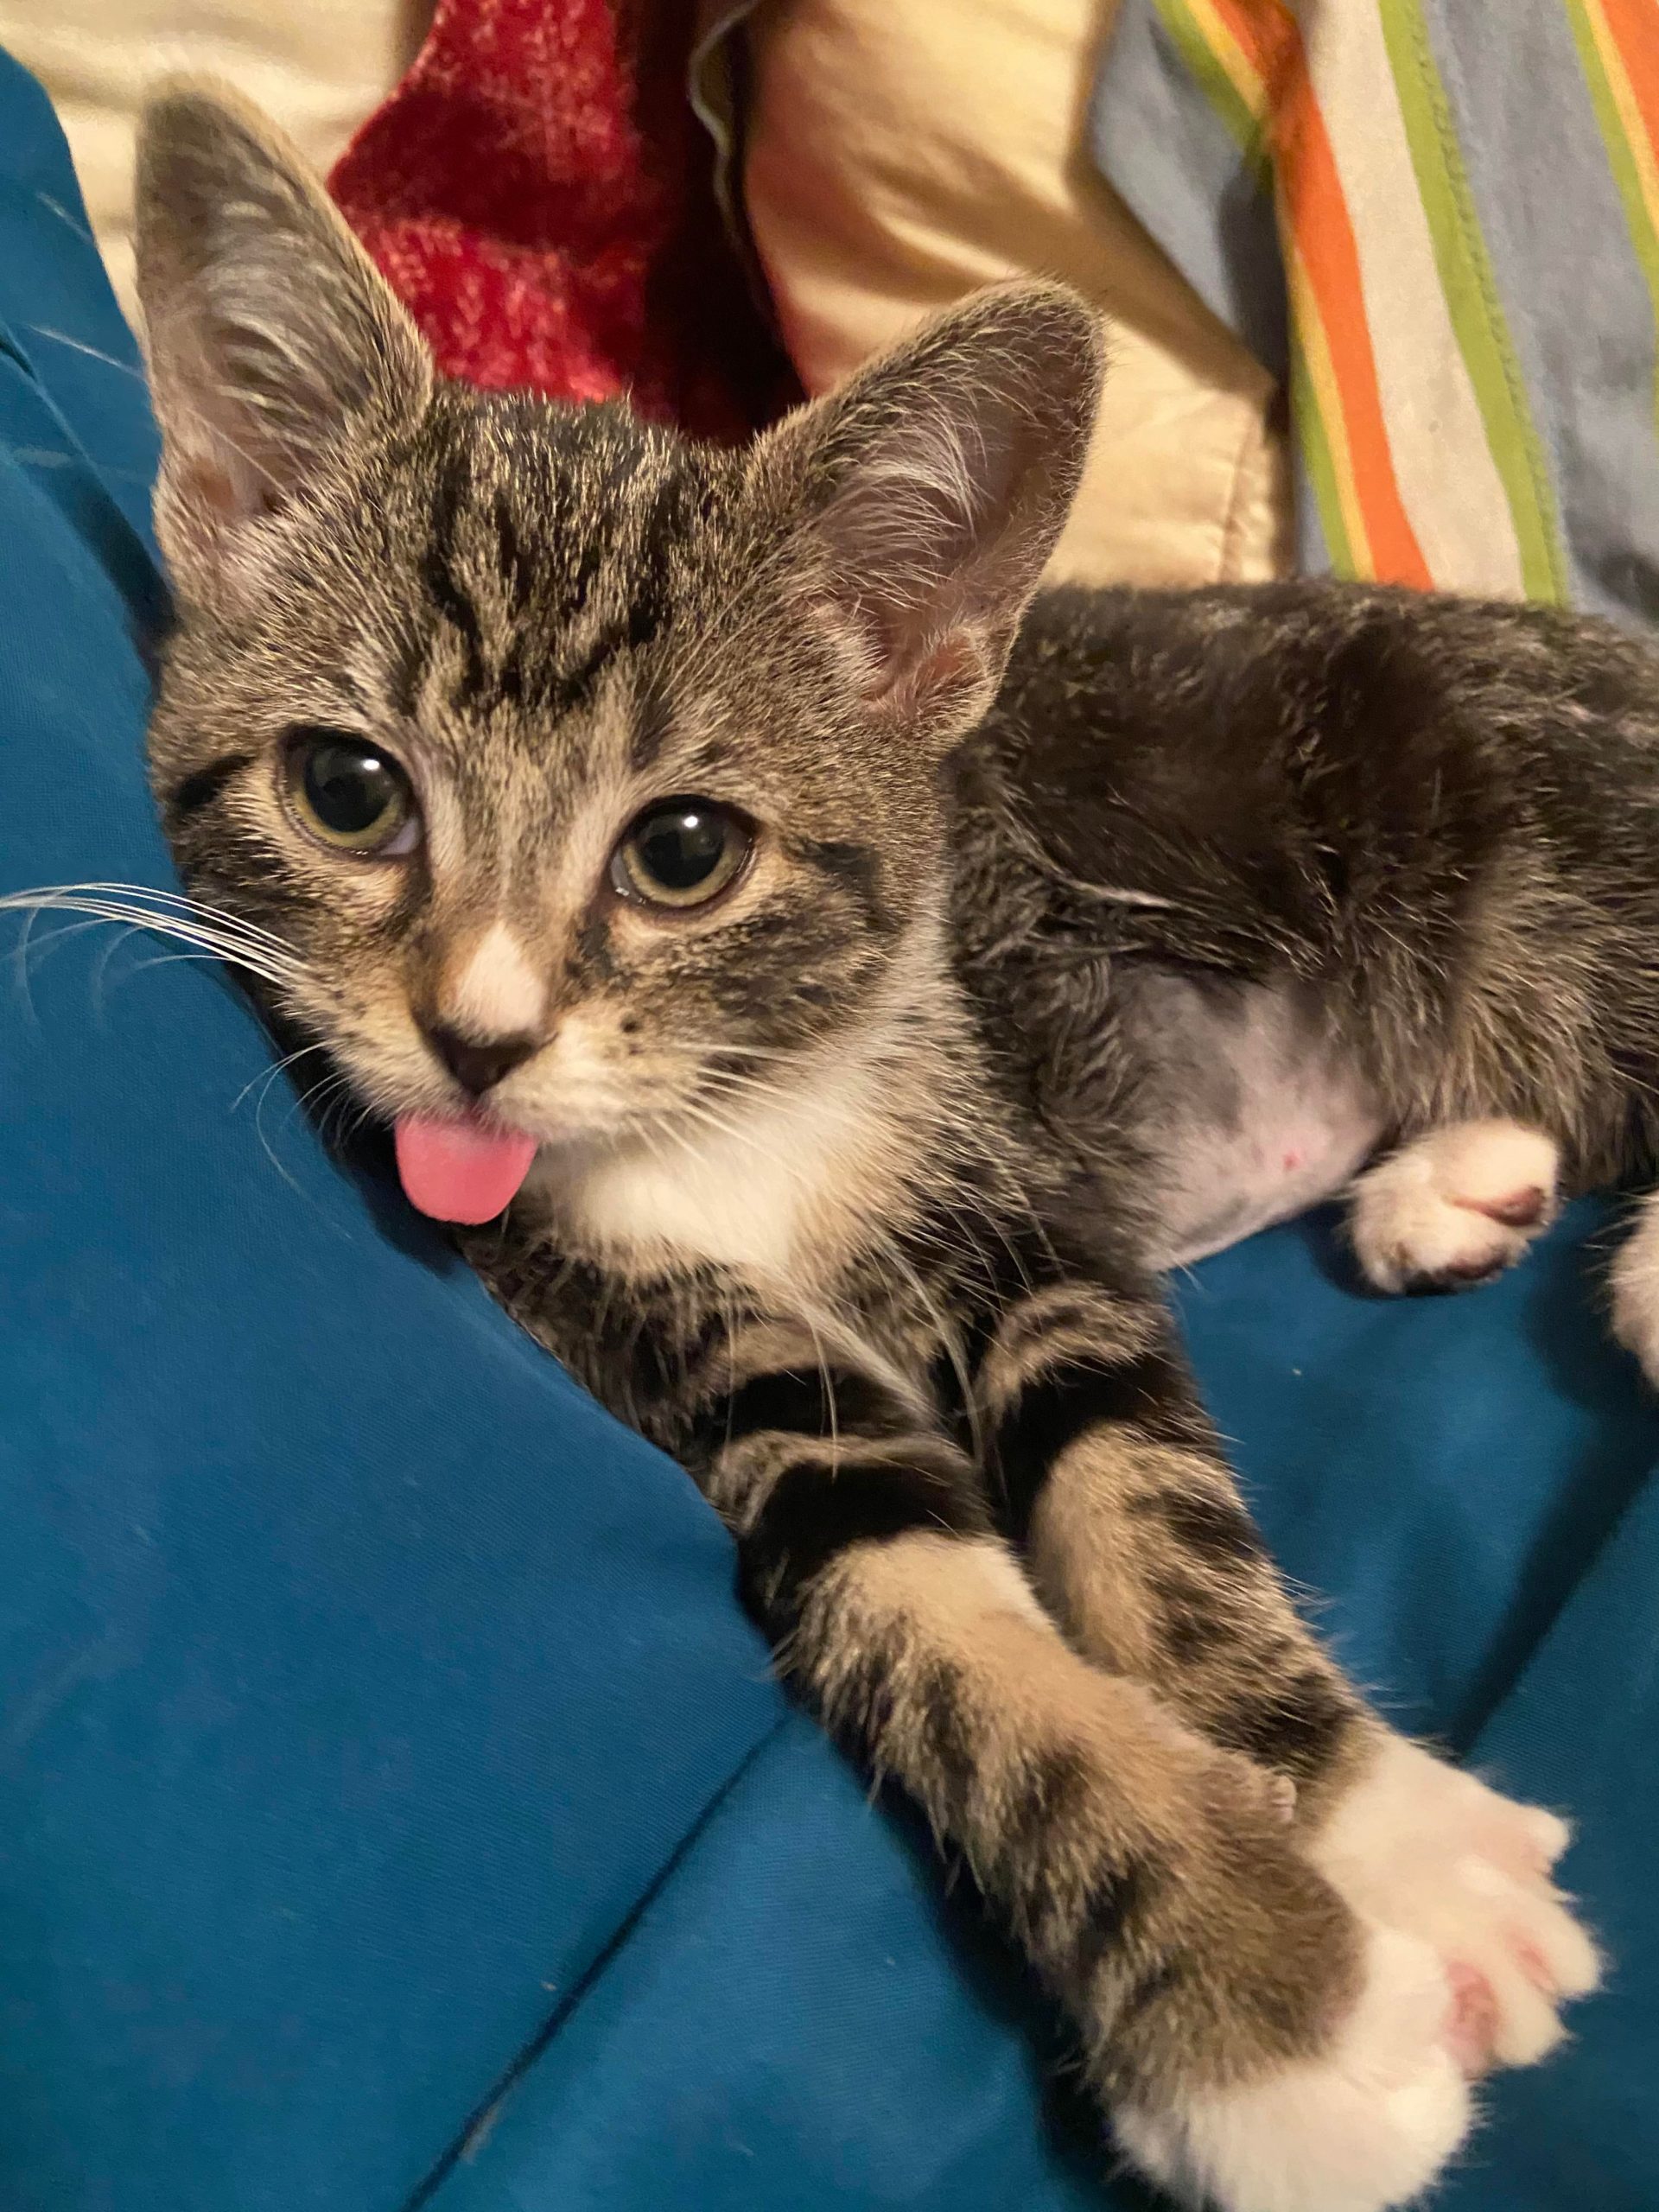 Twitter 上的meow Moe Peggy Loves To Stick Her Tongue Out All The Time Cats Cat Kittens Kitten Kitty Pets Pet Meow Moe Cutecats Cutecat Cutekittens Cutekitten Meowmoe T Co Qy7ub8pevt T Co Fckcy6gxlt Twitter